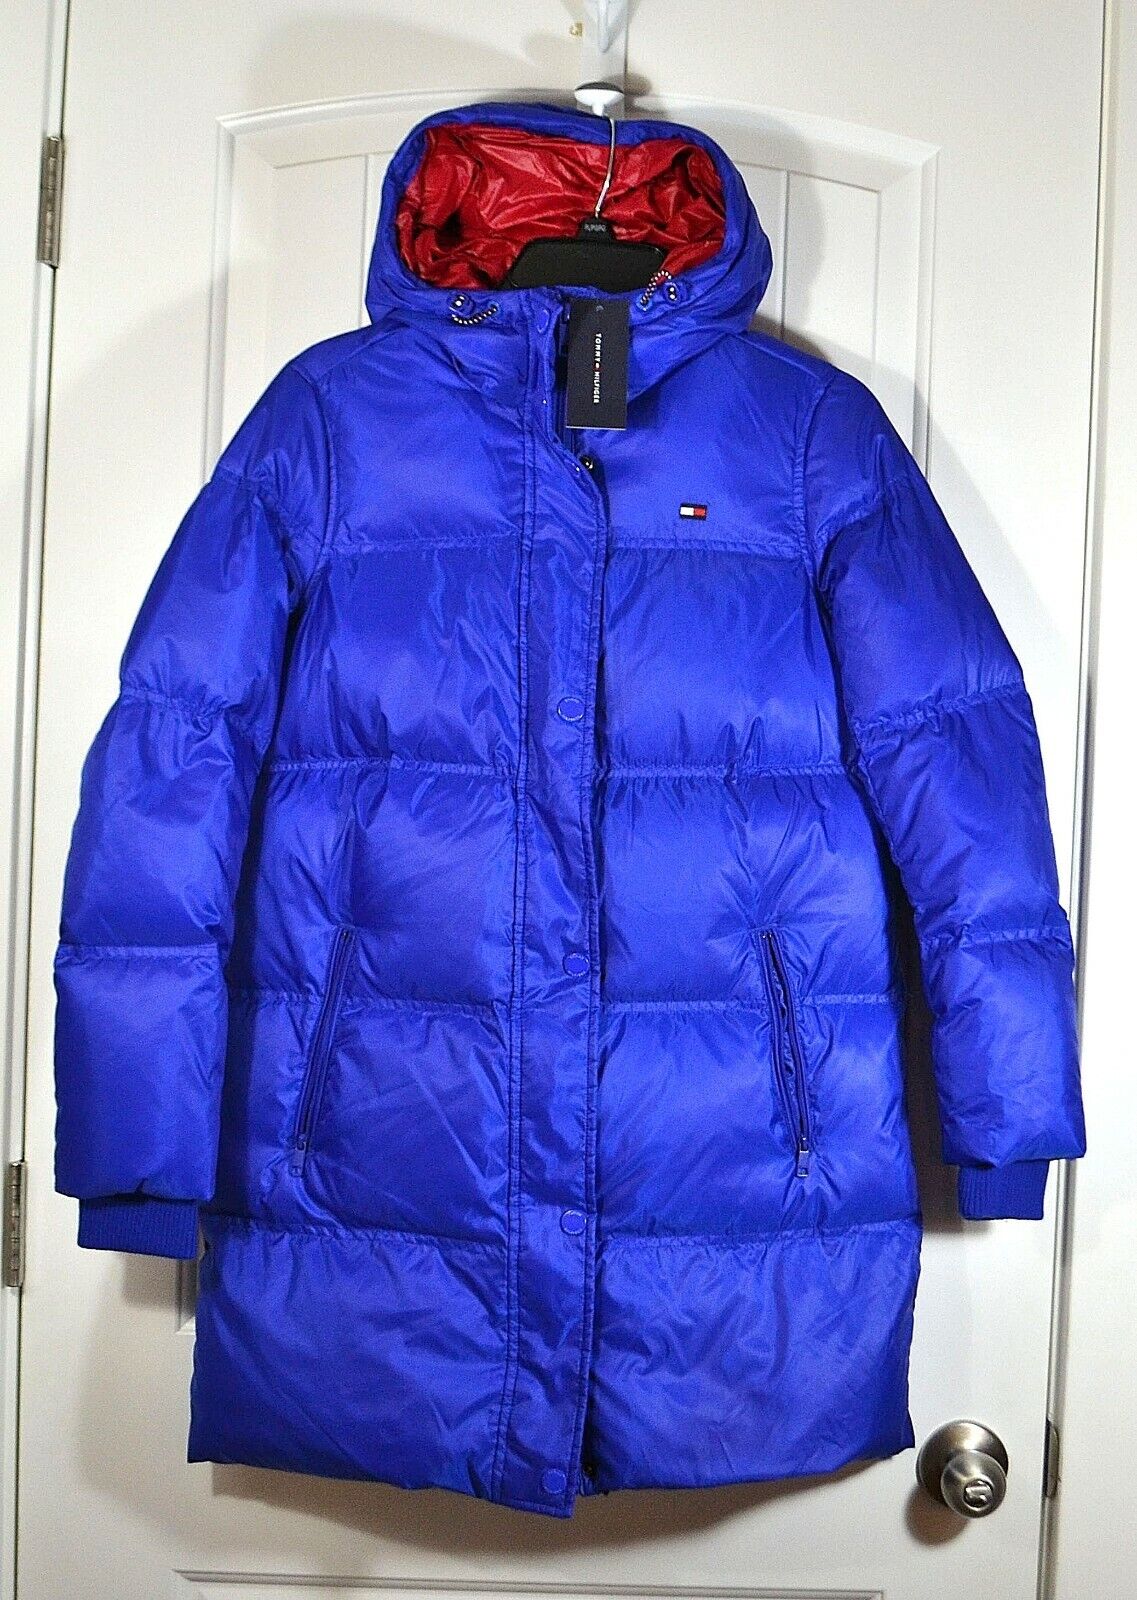 NWT WOMENS TOMMY HILFIGER BLUE HOODED DOWN LONG PADDED JACKE